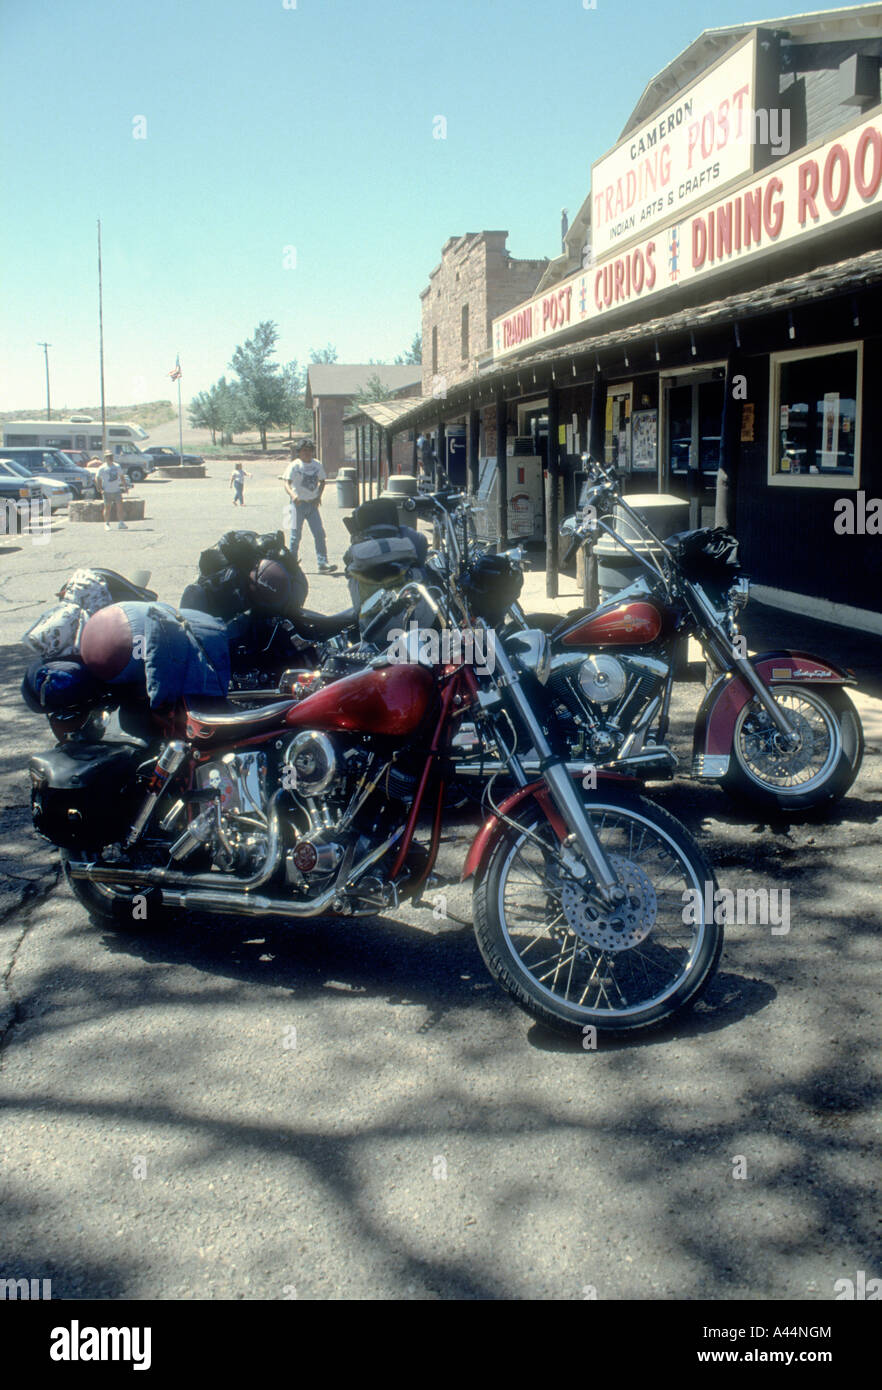 Harley Davidson Motorcycles,Parked Outside A Rest stop Area In Arizona USA. Stock Photo